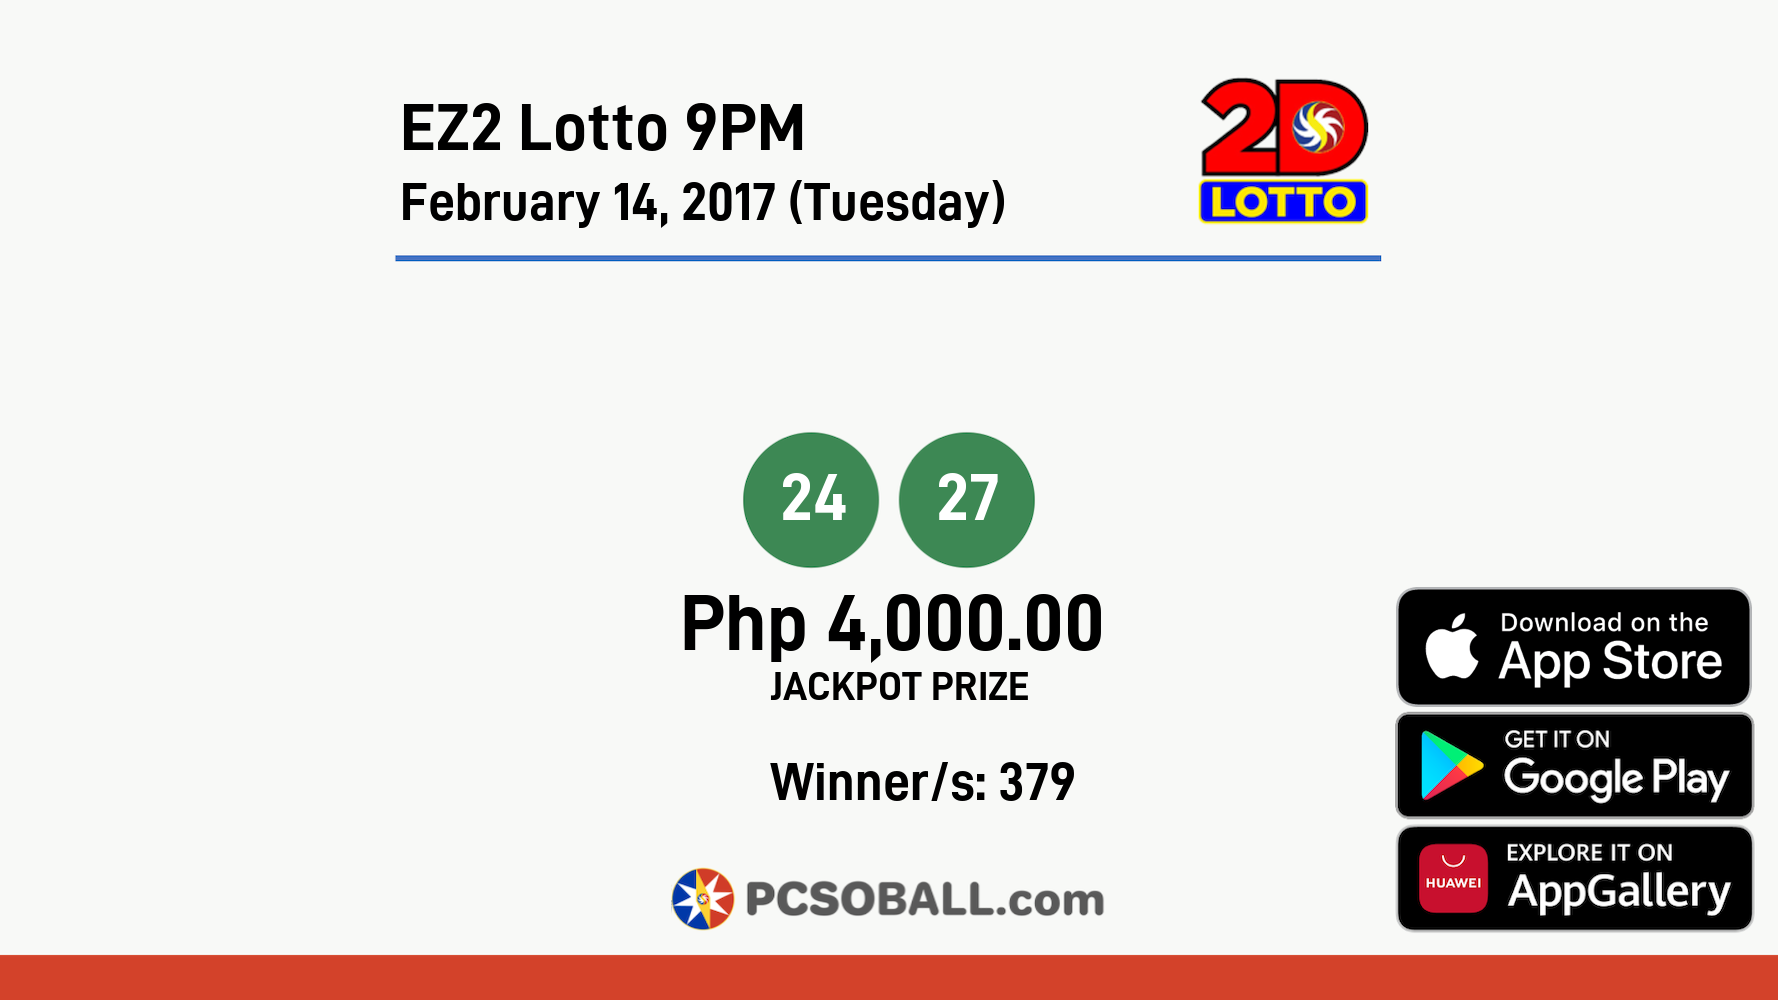 EZ2 Lotto 9PM February 14, 2017 (Tuesday) Result